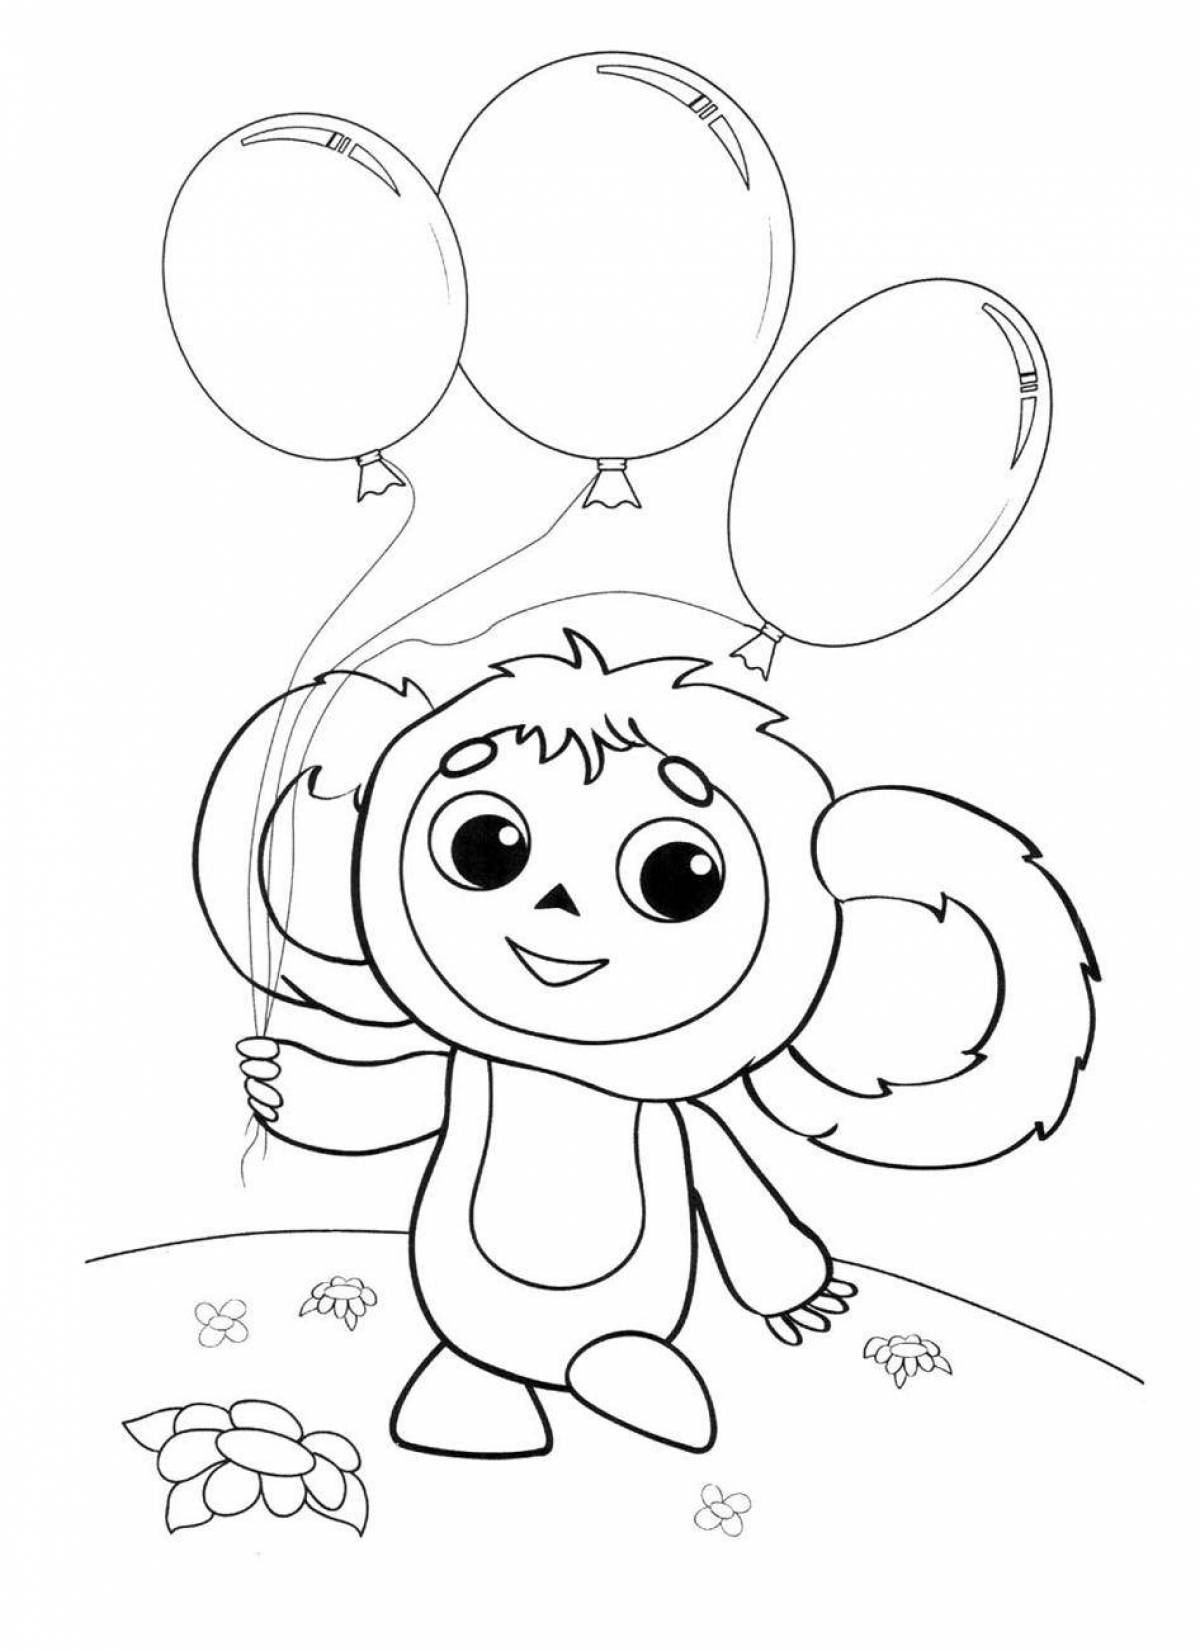 Colorful shaded picture of cheburashka for children